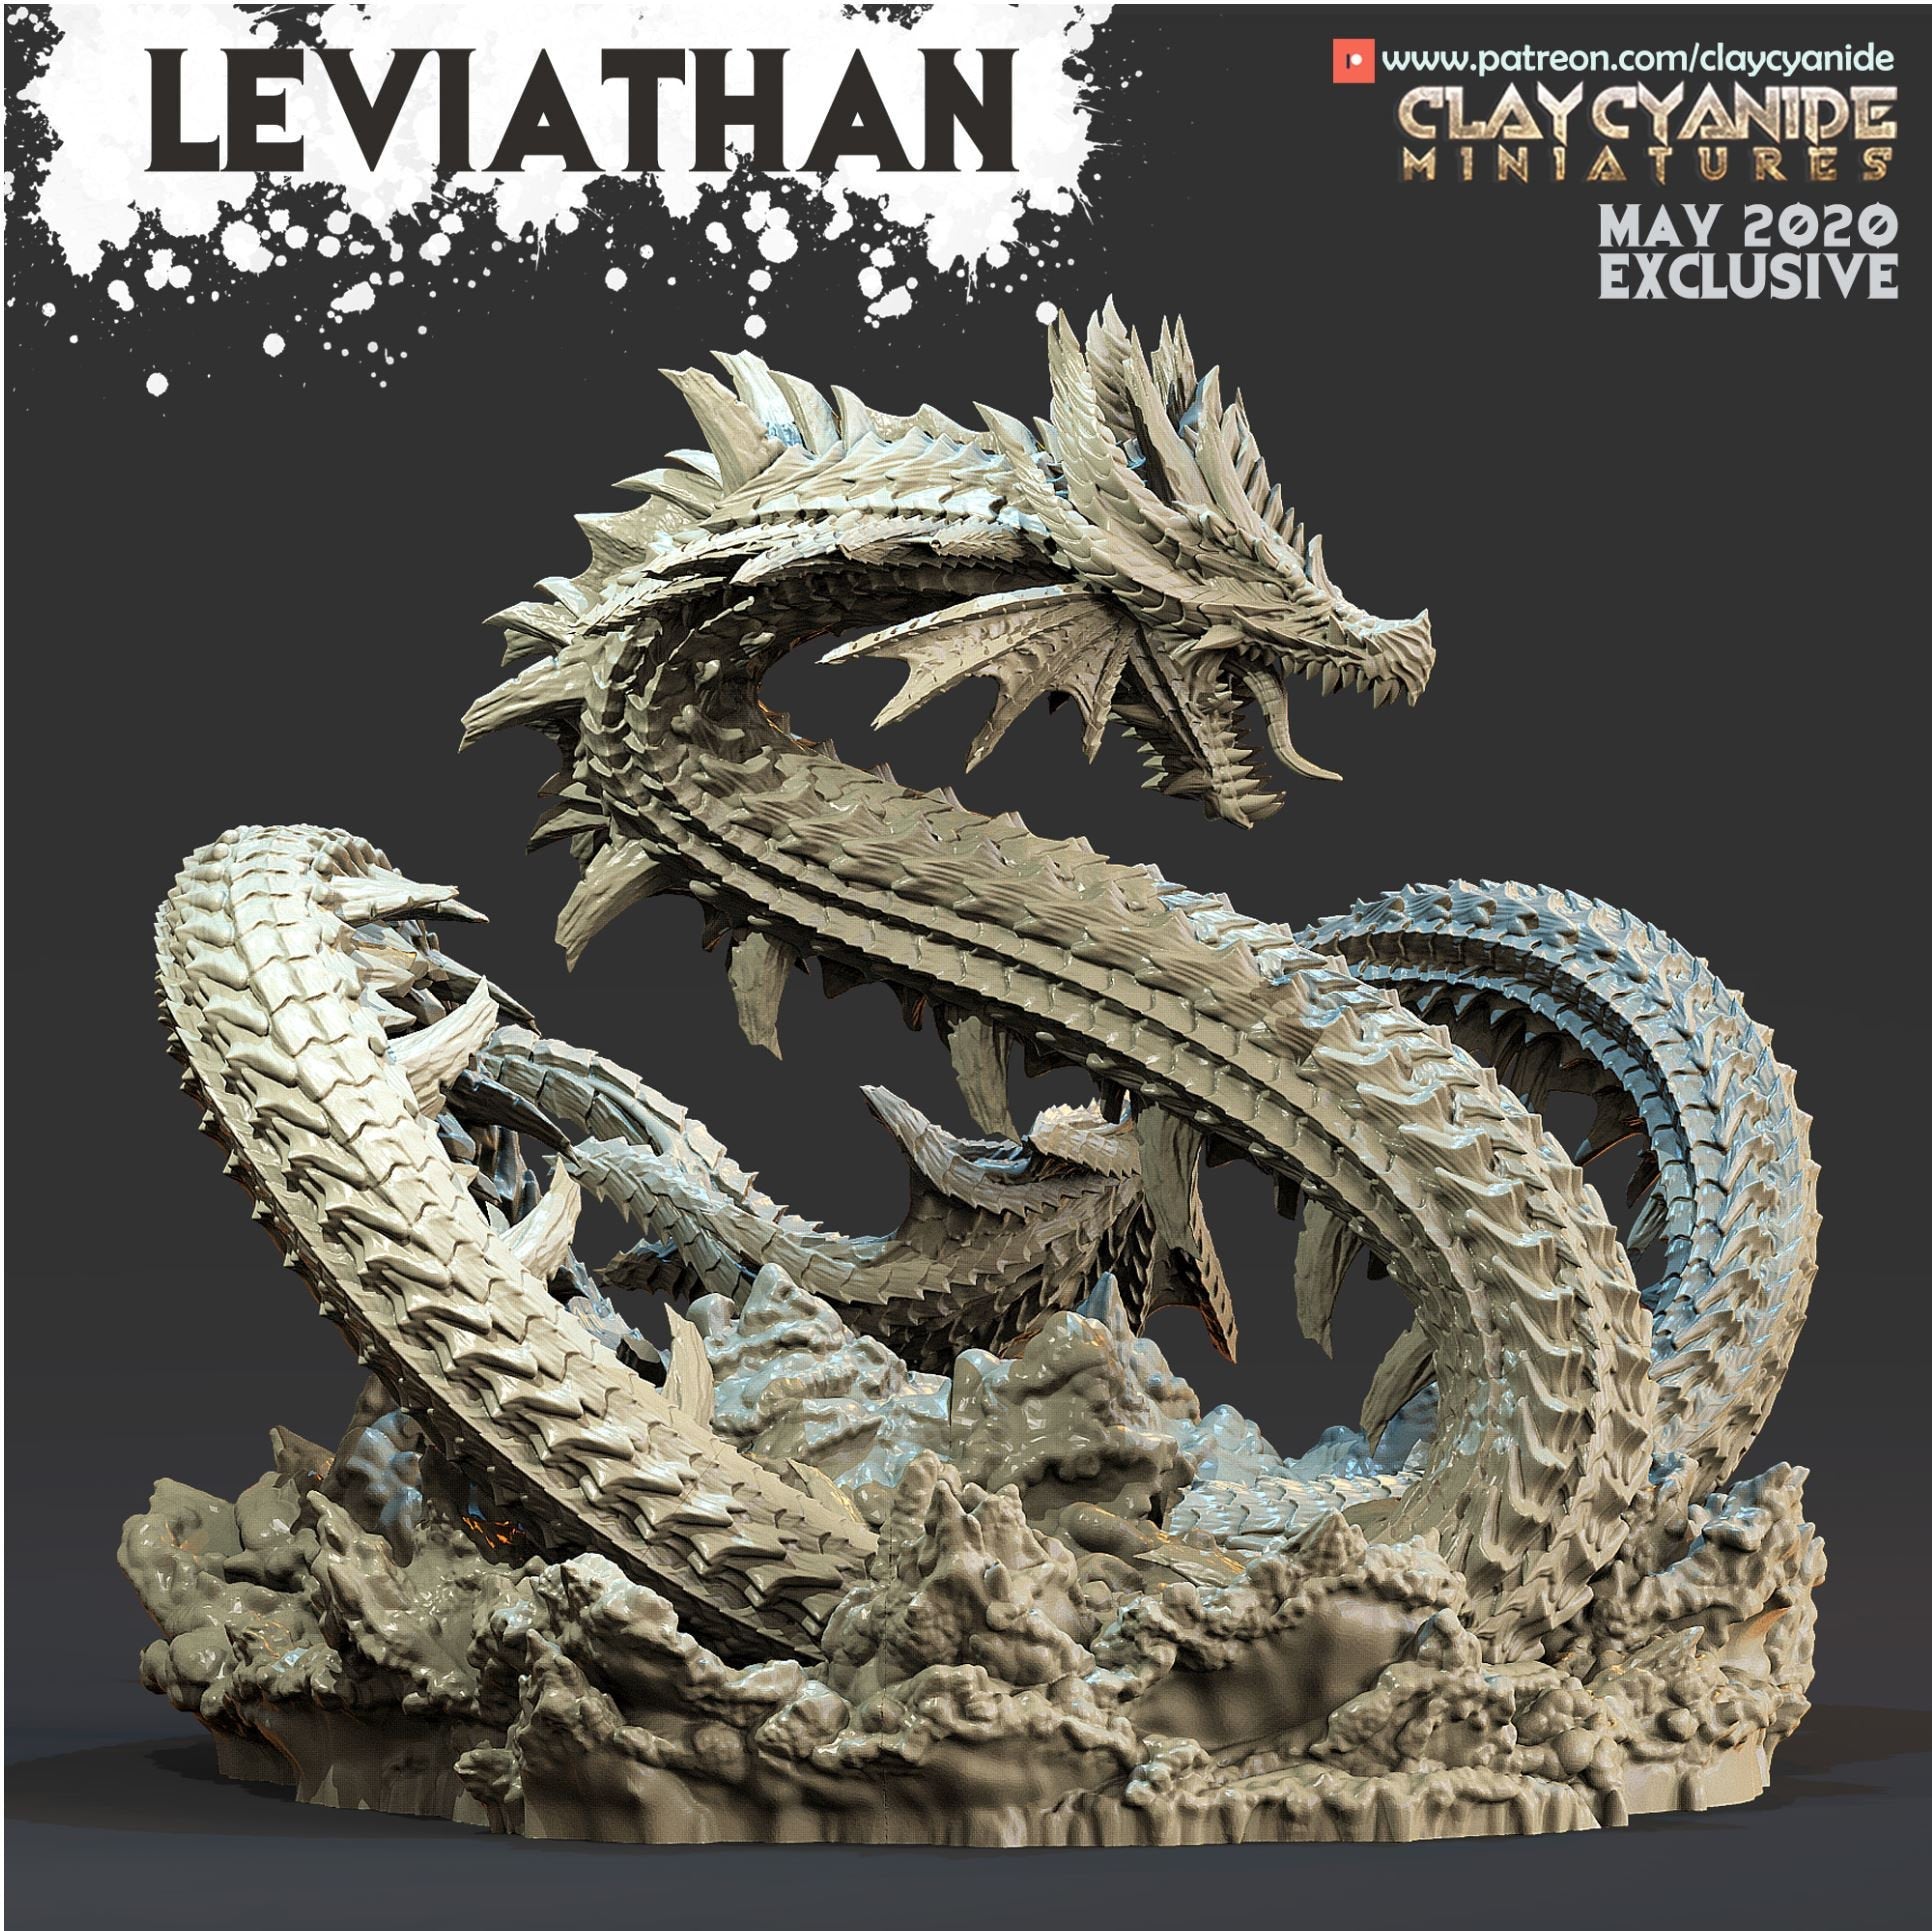 Leviathan from Clay Cyanide Miniatures. This piece is very much a Premium Print!